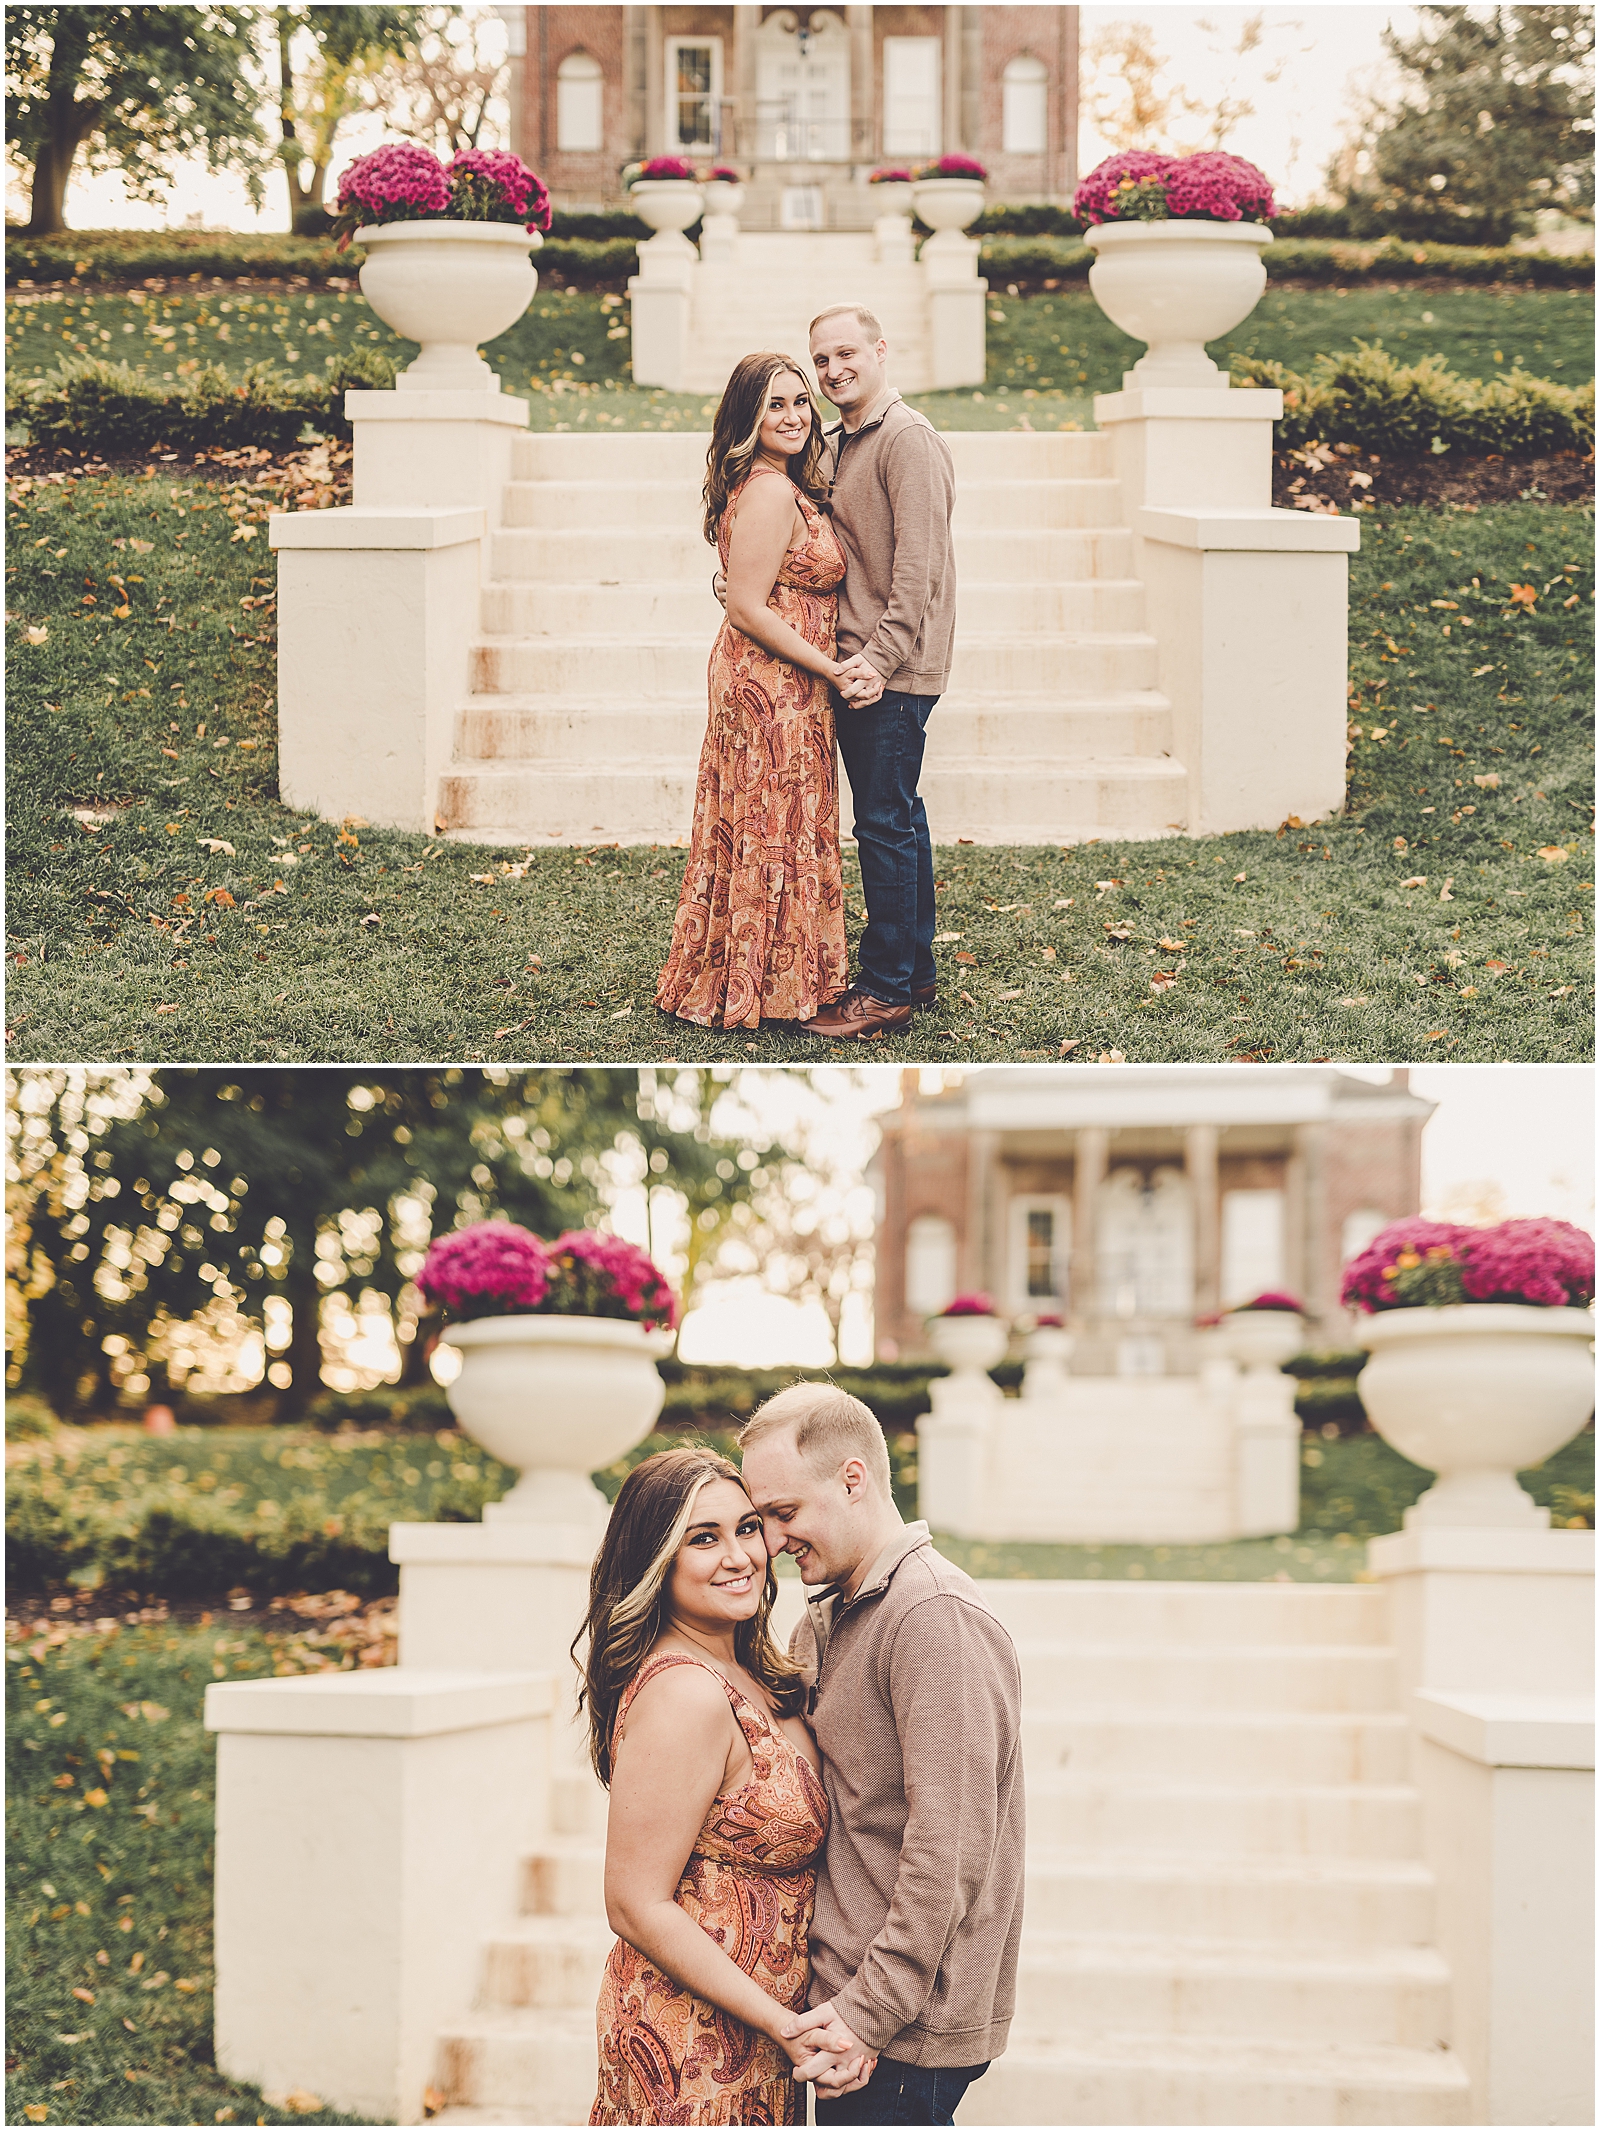 Nicole and Thomas's fall Cantigny Park engagement photos in Wheaton with Chicagoland wedding photographer Kara Evans Photographer.